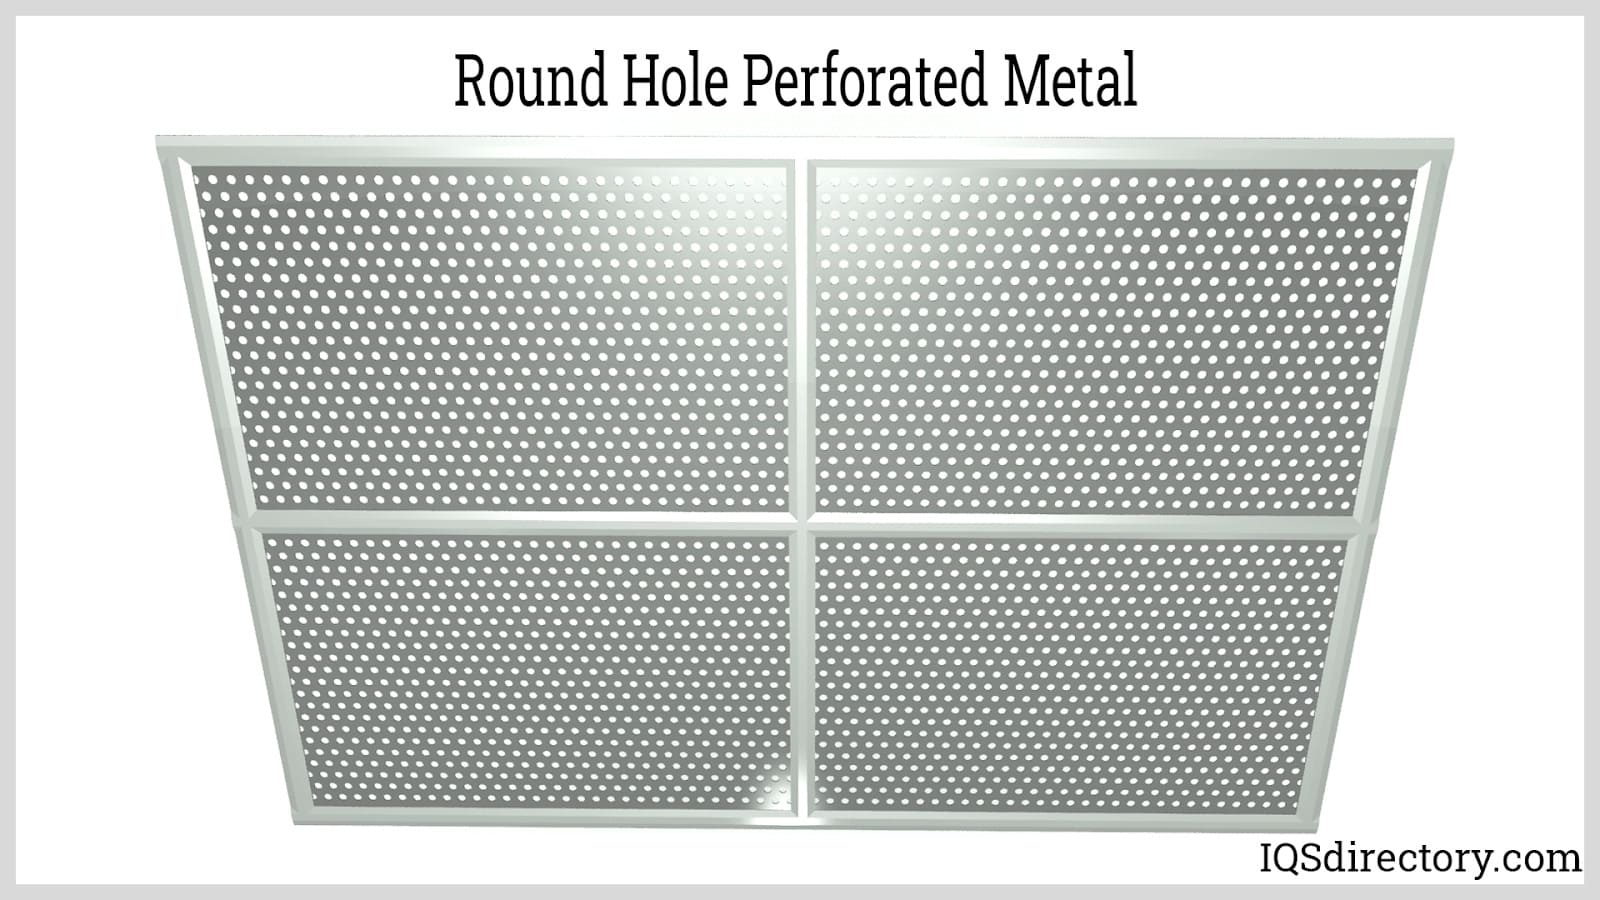 Round Hole Perforated Sheet Metal